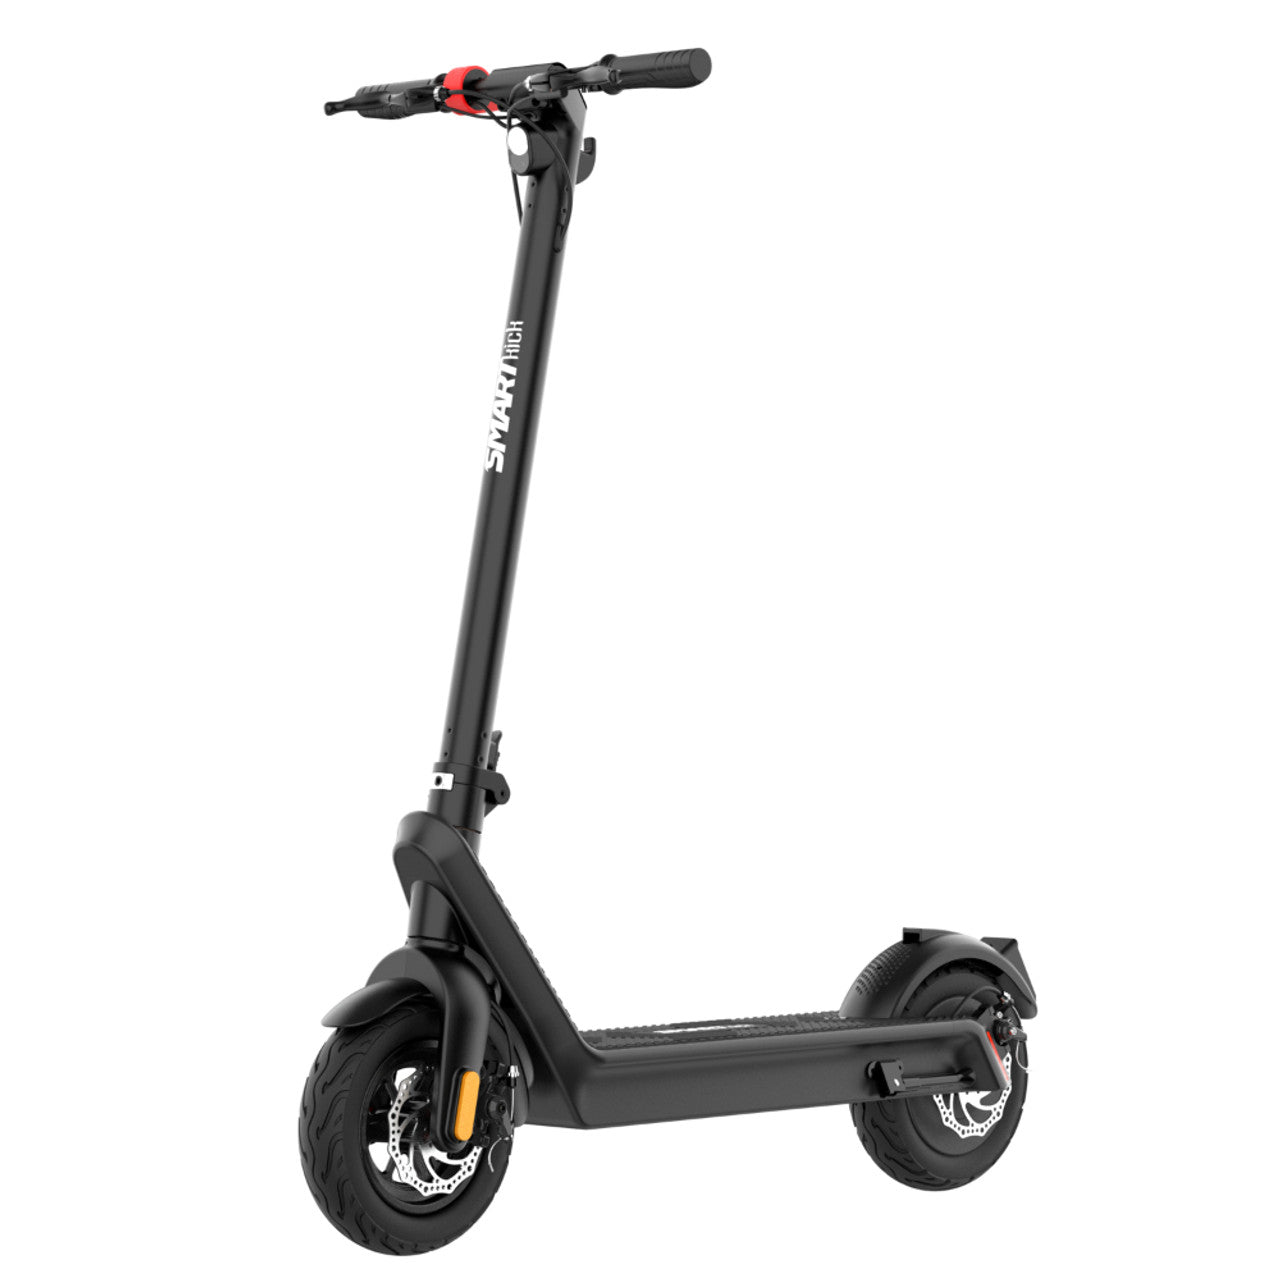 Super Cool SmartKick X9 Plus 560Wh Electric Kick Scooter with Removable Battery, Triple Brakes, Tubeless Tire | Up To 40KPH